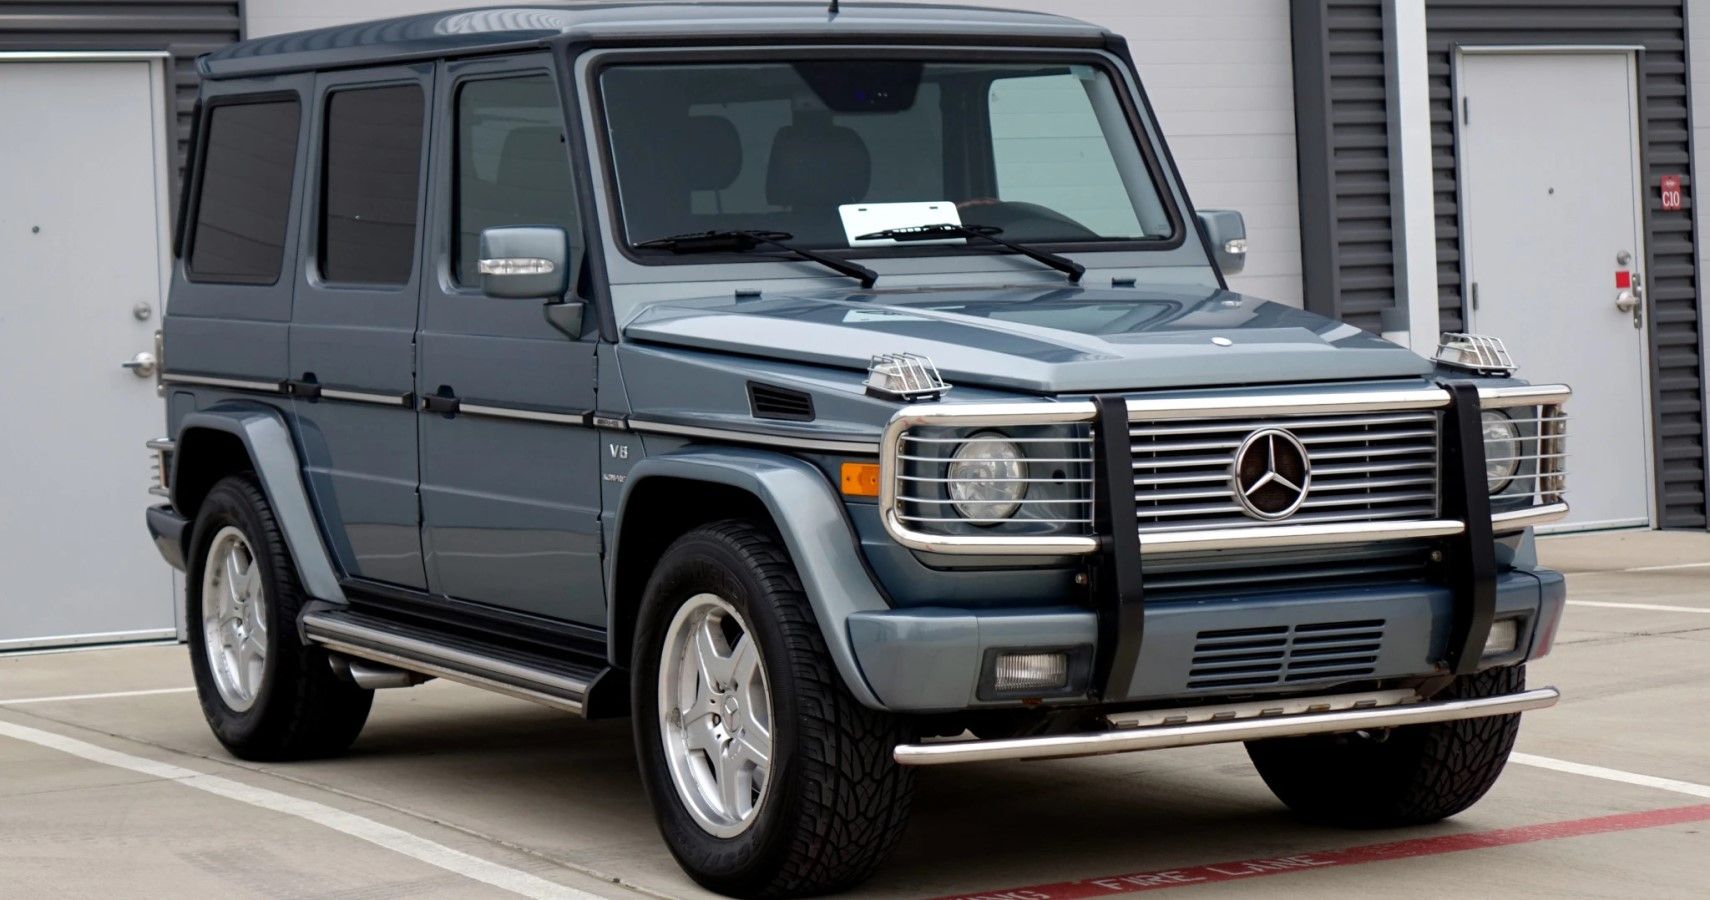 Why The 2005 Mercedes-Benz G-Wagen Could Be A Good But Risky Buy In 2022